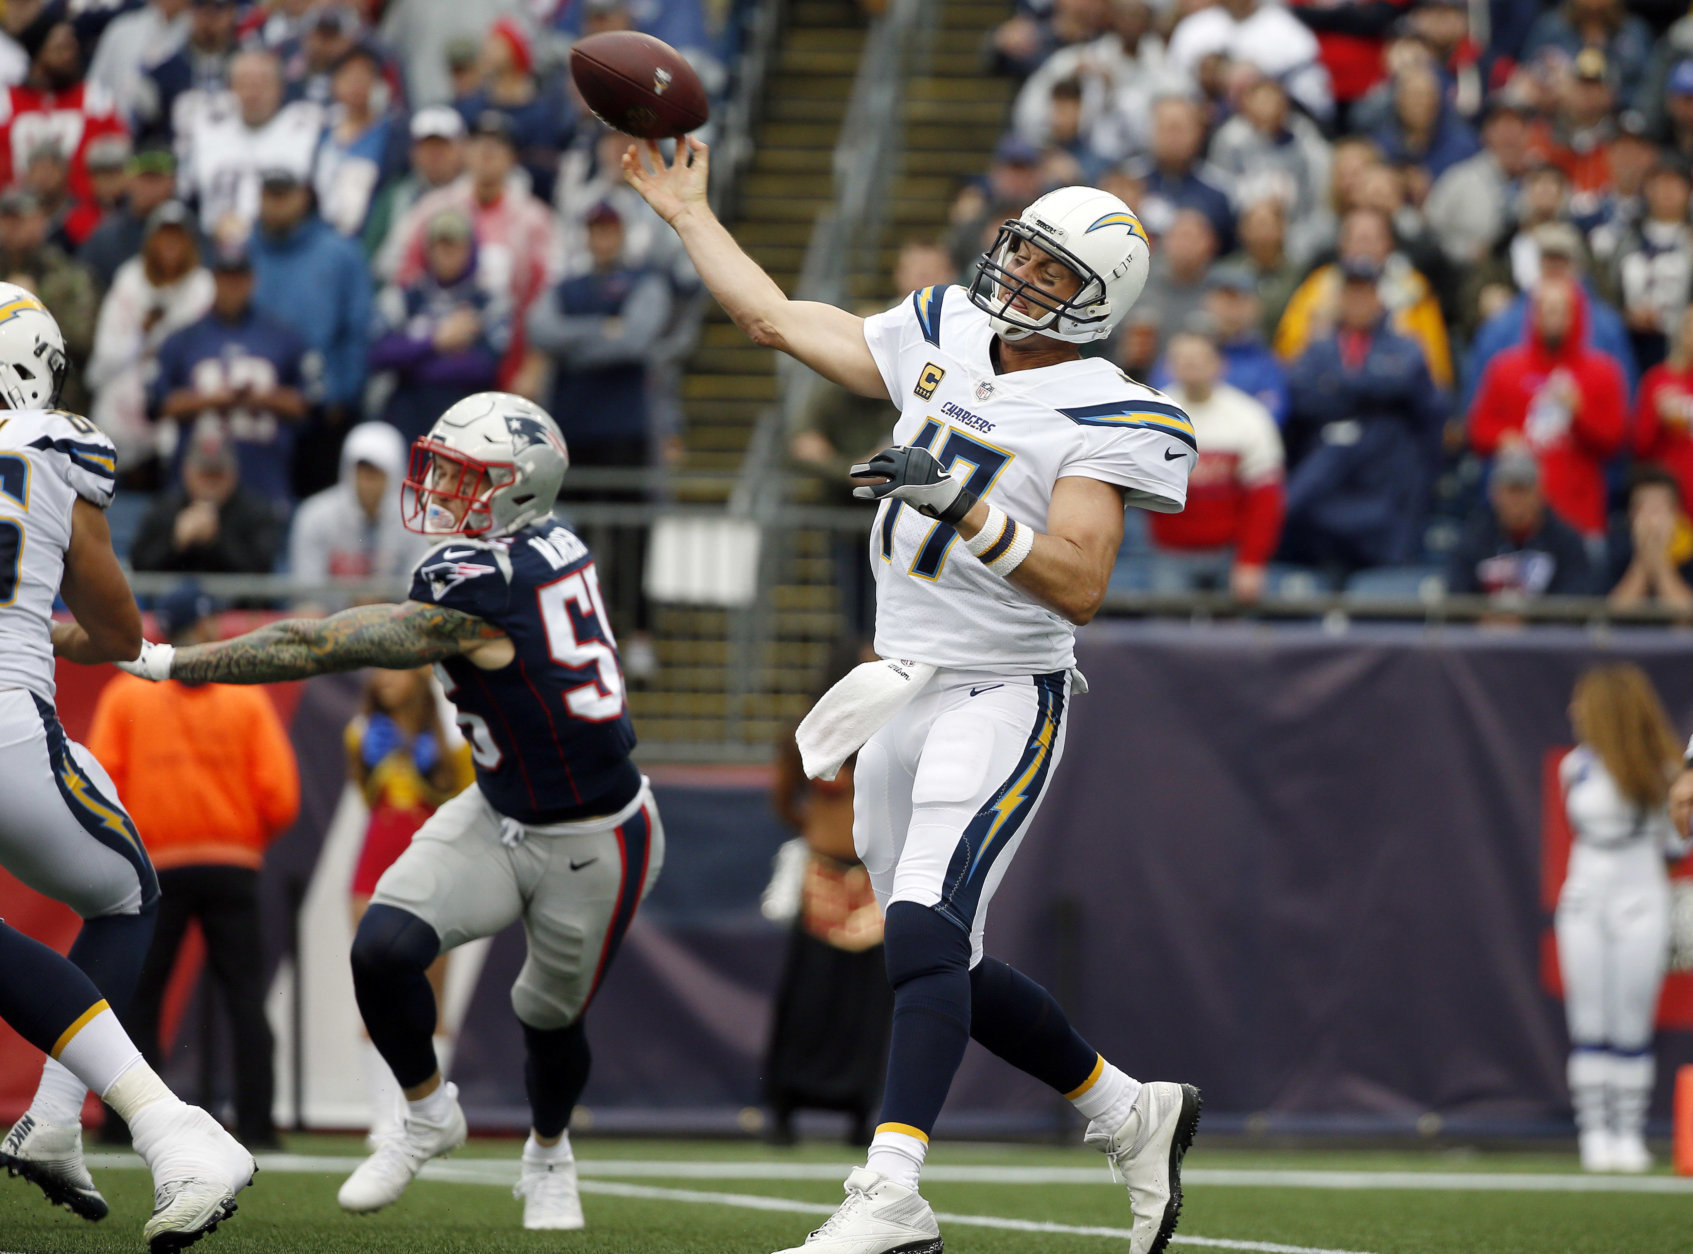 Los Angeles Chargers quarterback Philip Rivers (17) passes under pressure from New England Patriots defensive end Cassius Marsh (55) during the first half of an NFL football game, Sunday, Oct. 29, 2017, in Foxborough, Mass. (AP Photo/Michael Dwyer)